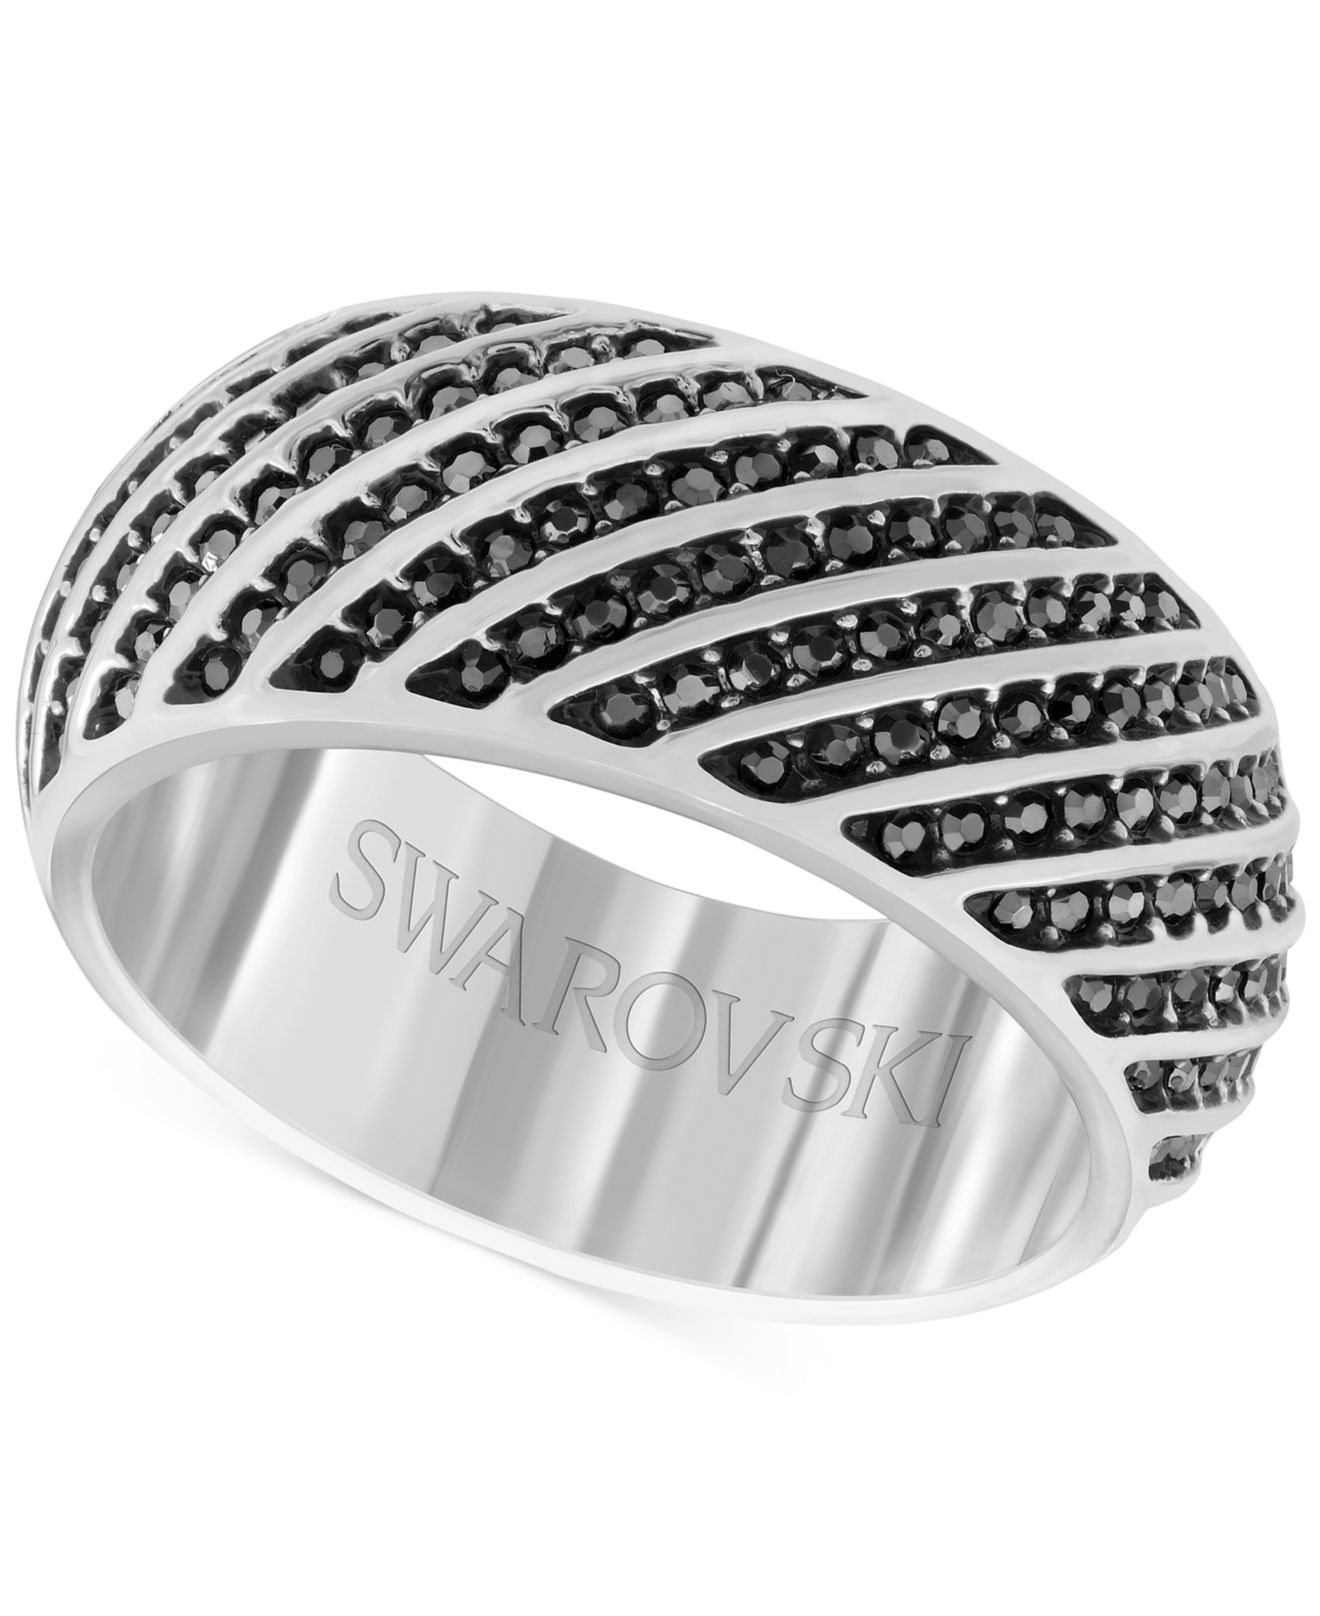 Mens Black Top With Crystal Pave Silver Stainless Steel Ring 